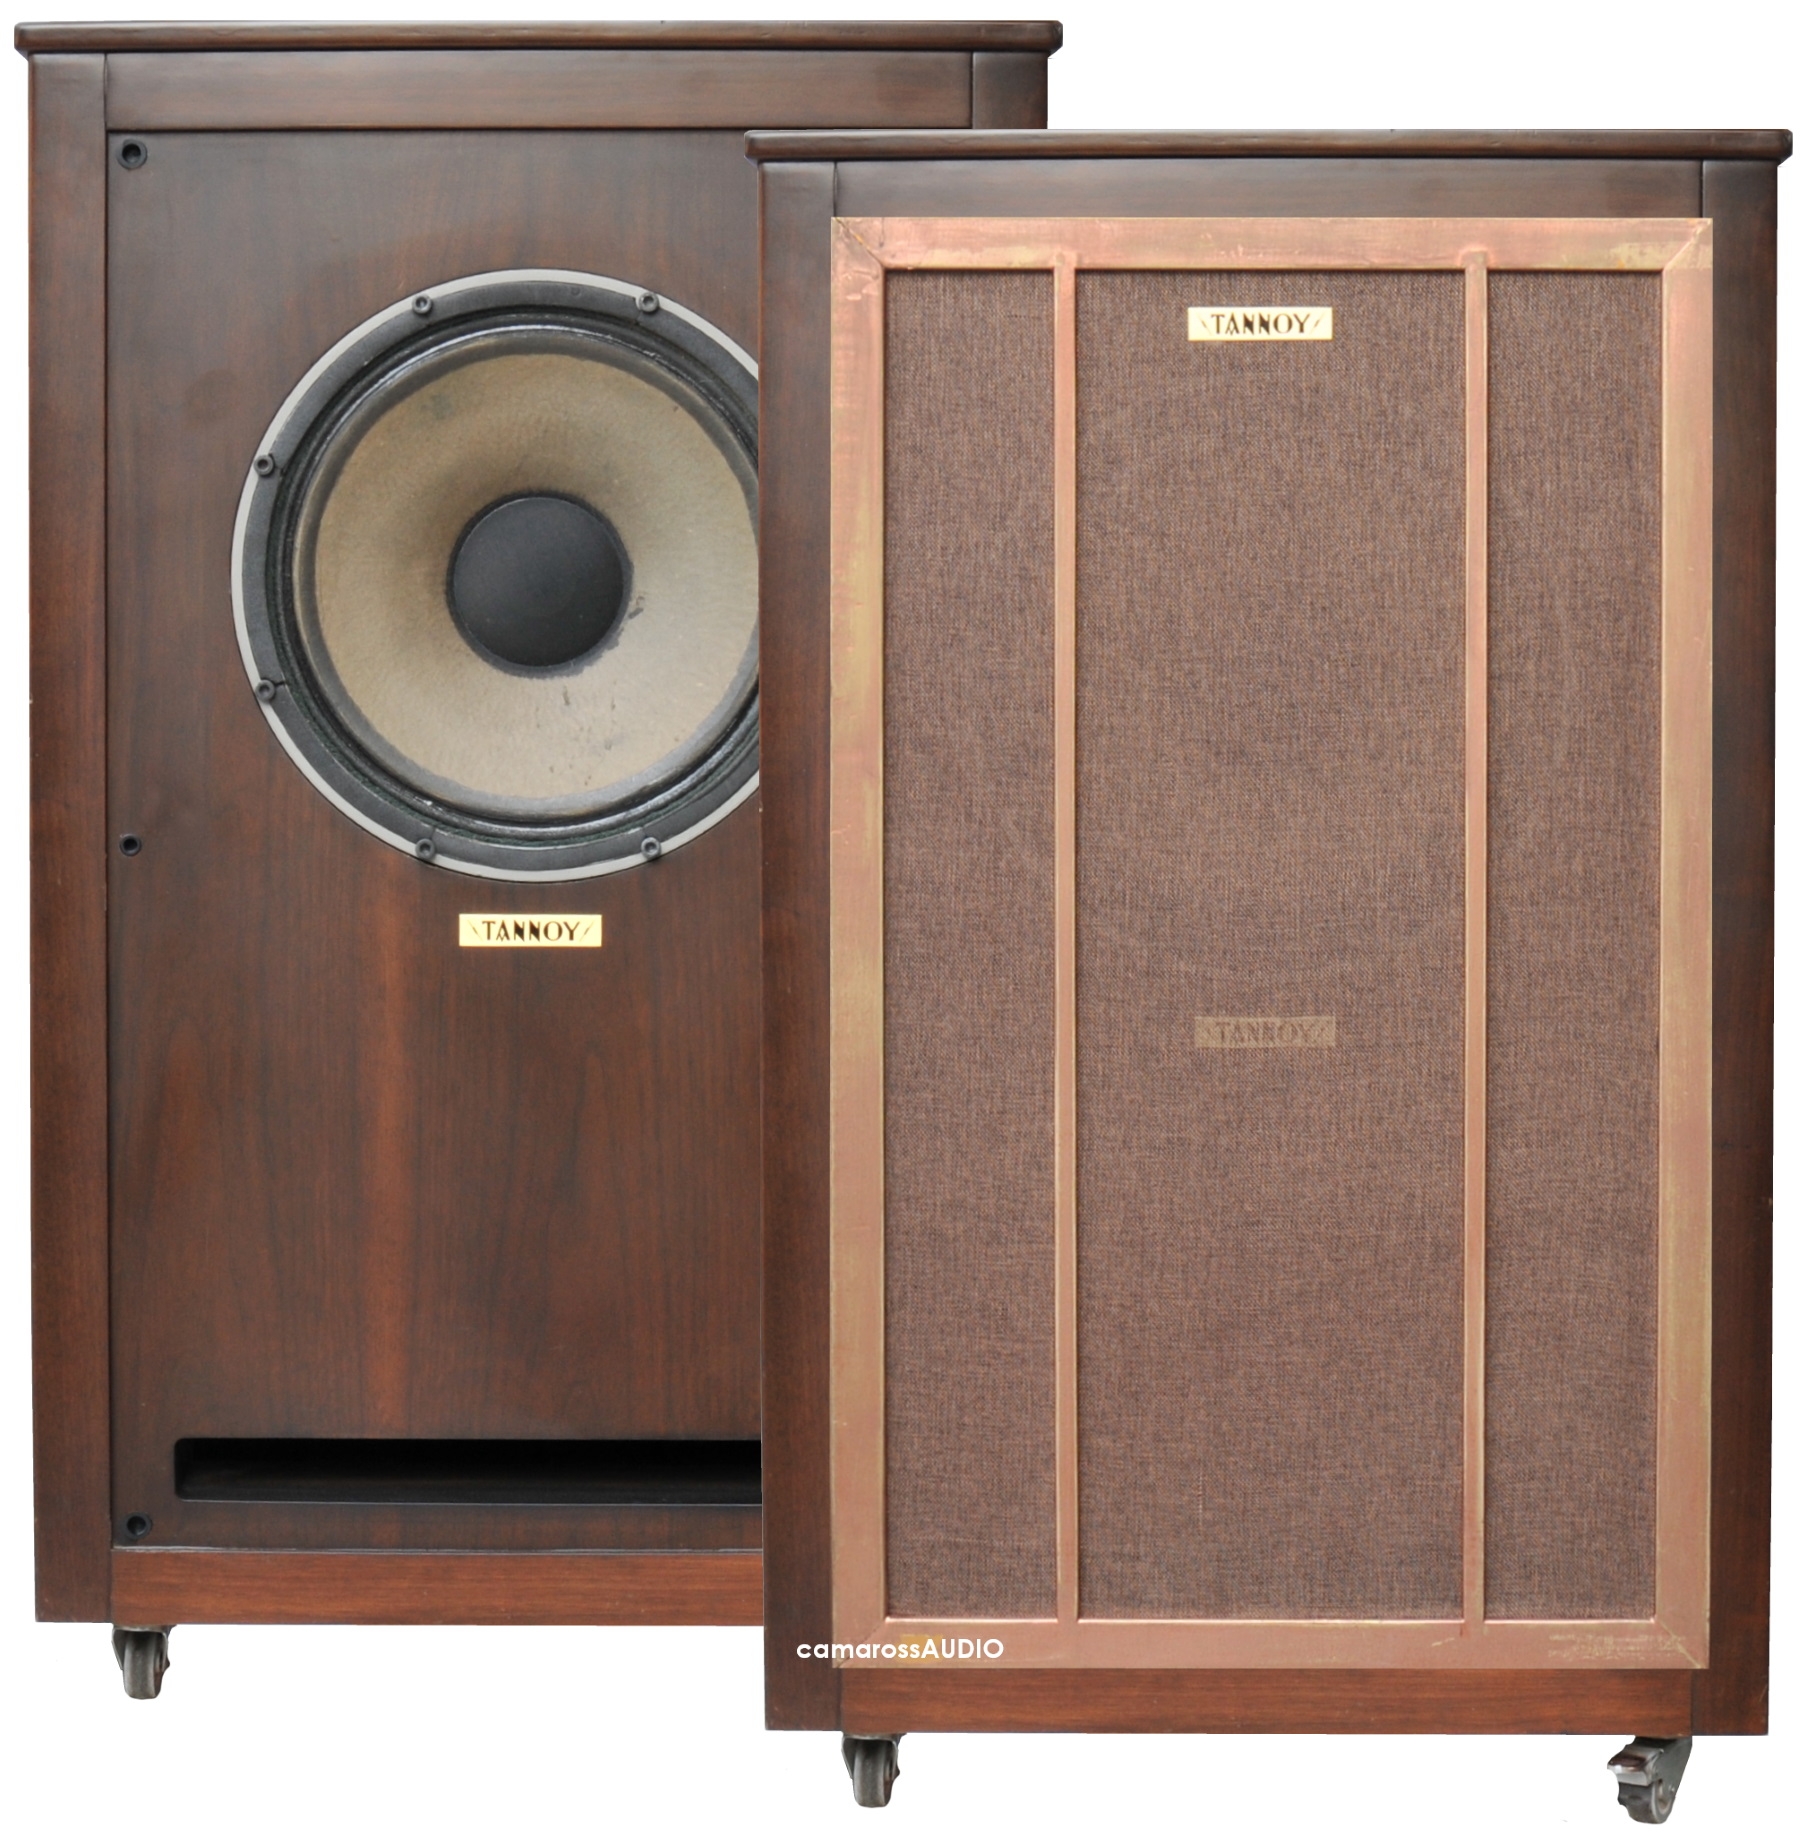 Tannoy gold. Tannoy super Gold Monitor 15. Tannoy little Gold Monitor 12. Tannoy Monitor Gold 15 JBL. Tannoy little Gold Monitor.